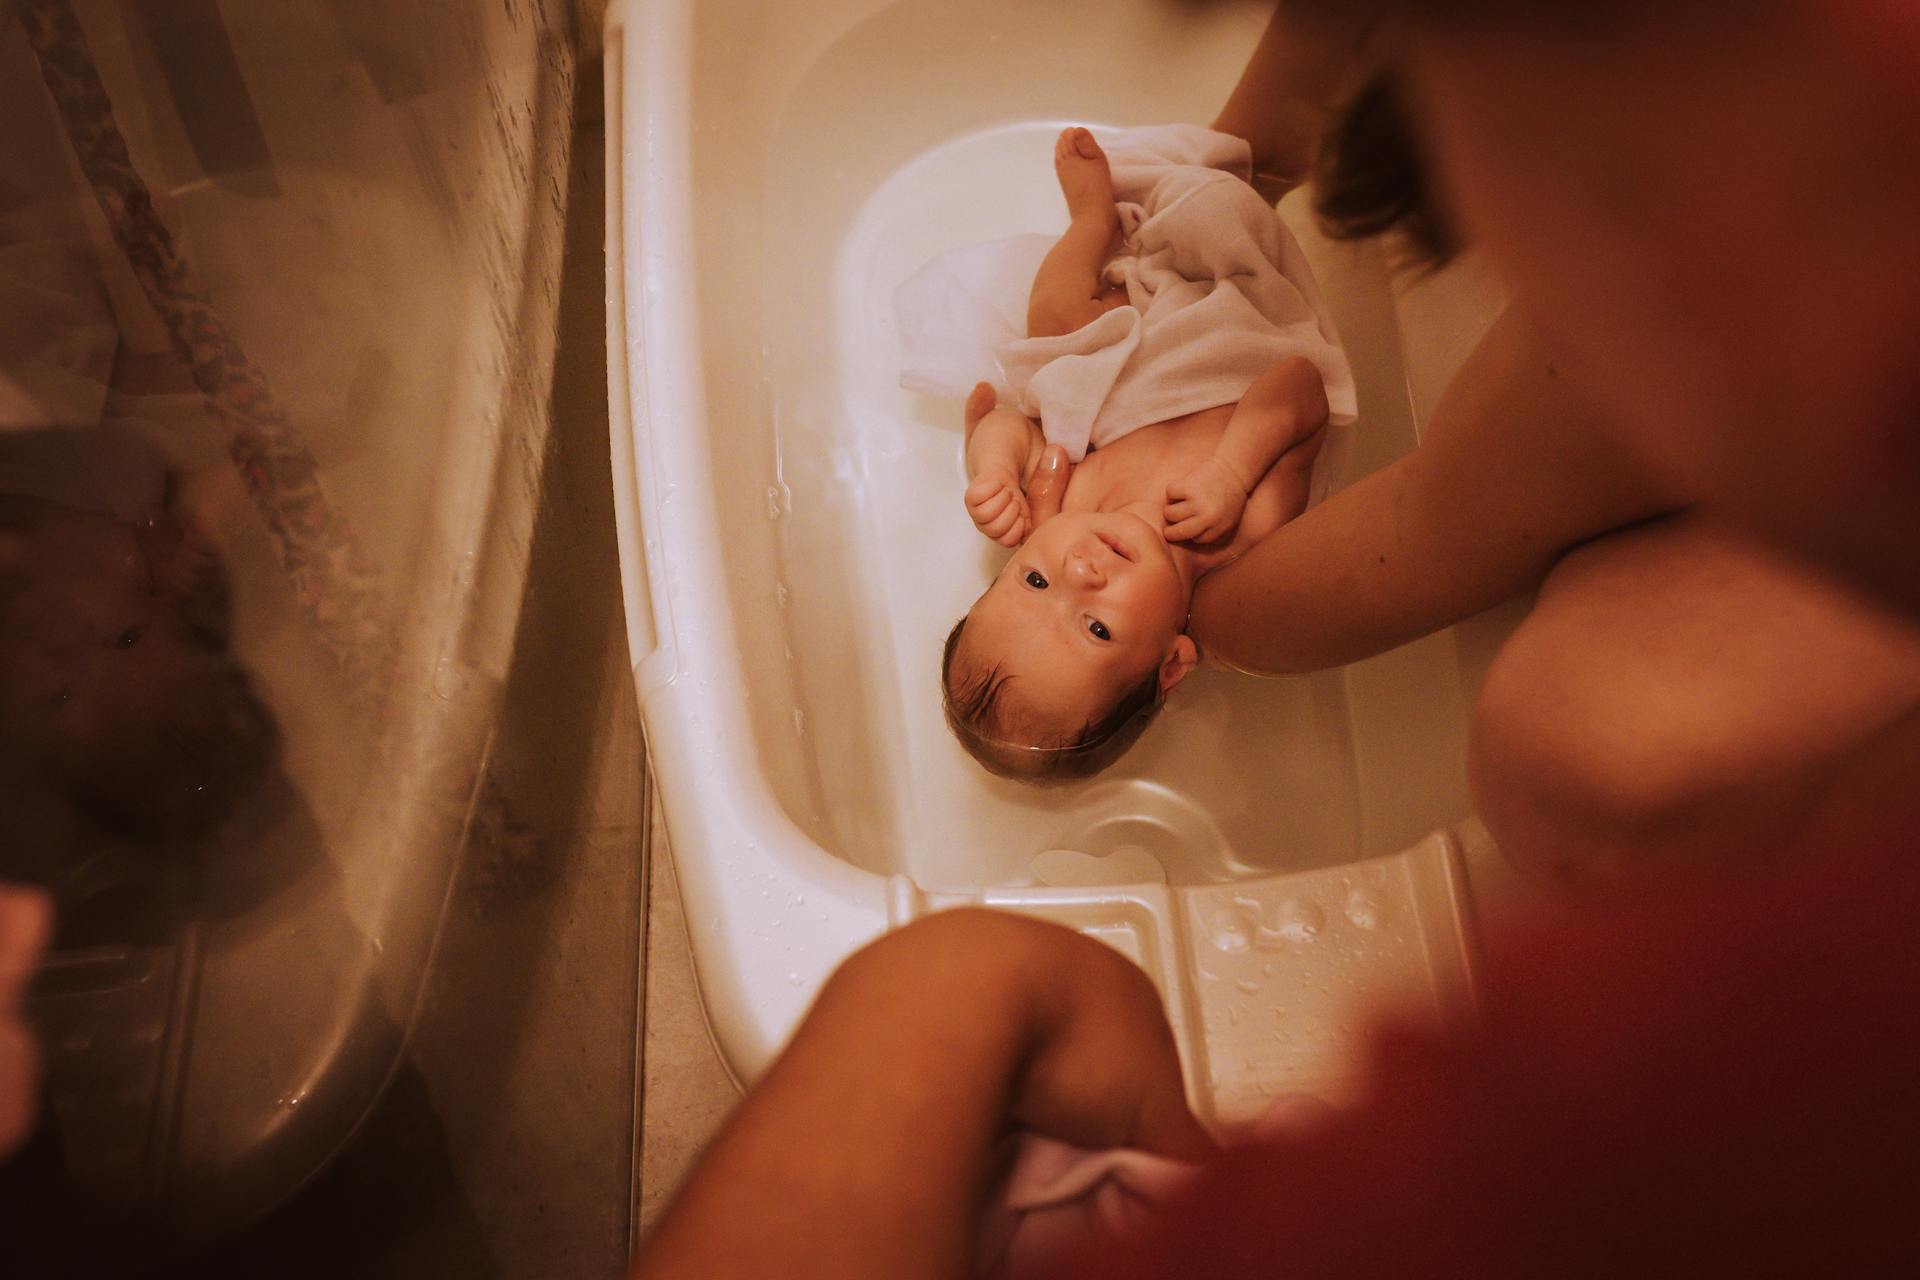 A person bathing a baby | Source: Pexels